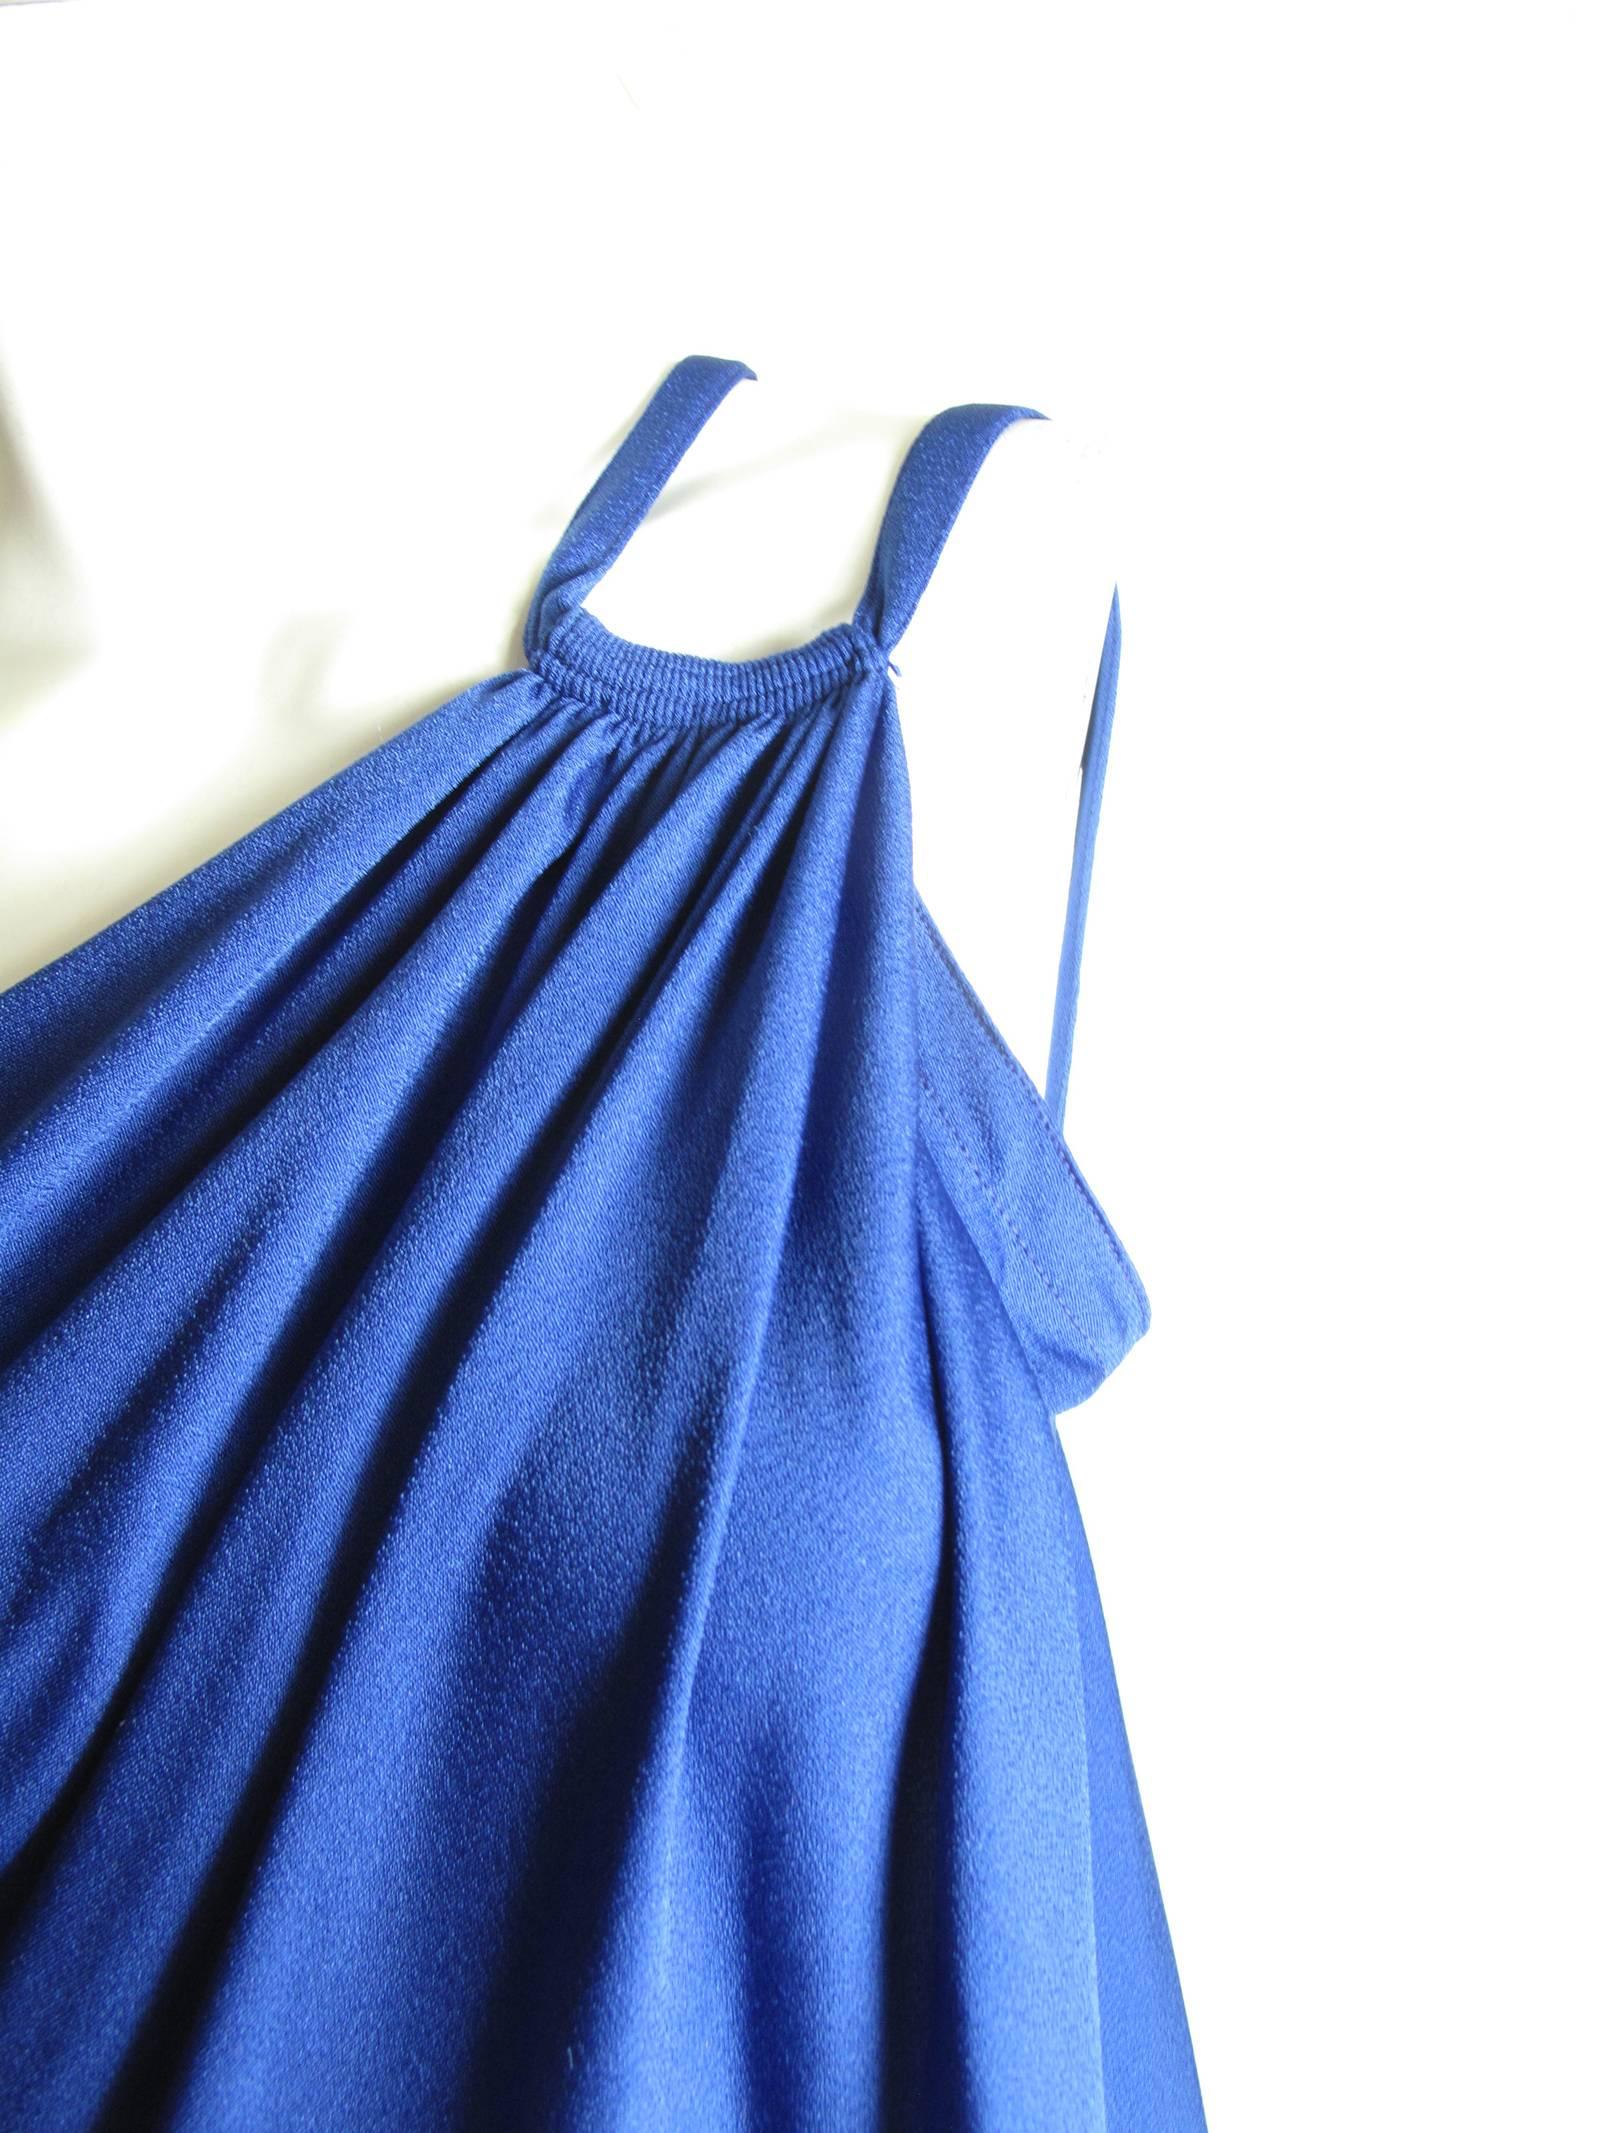 Blue Adele Simpson One Shoulder Gown, 1970s